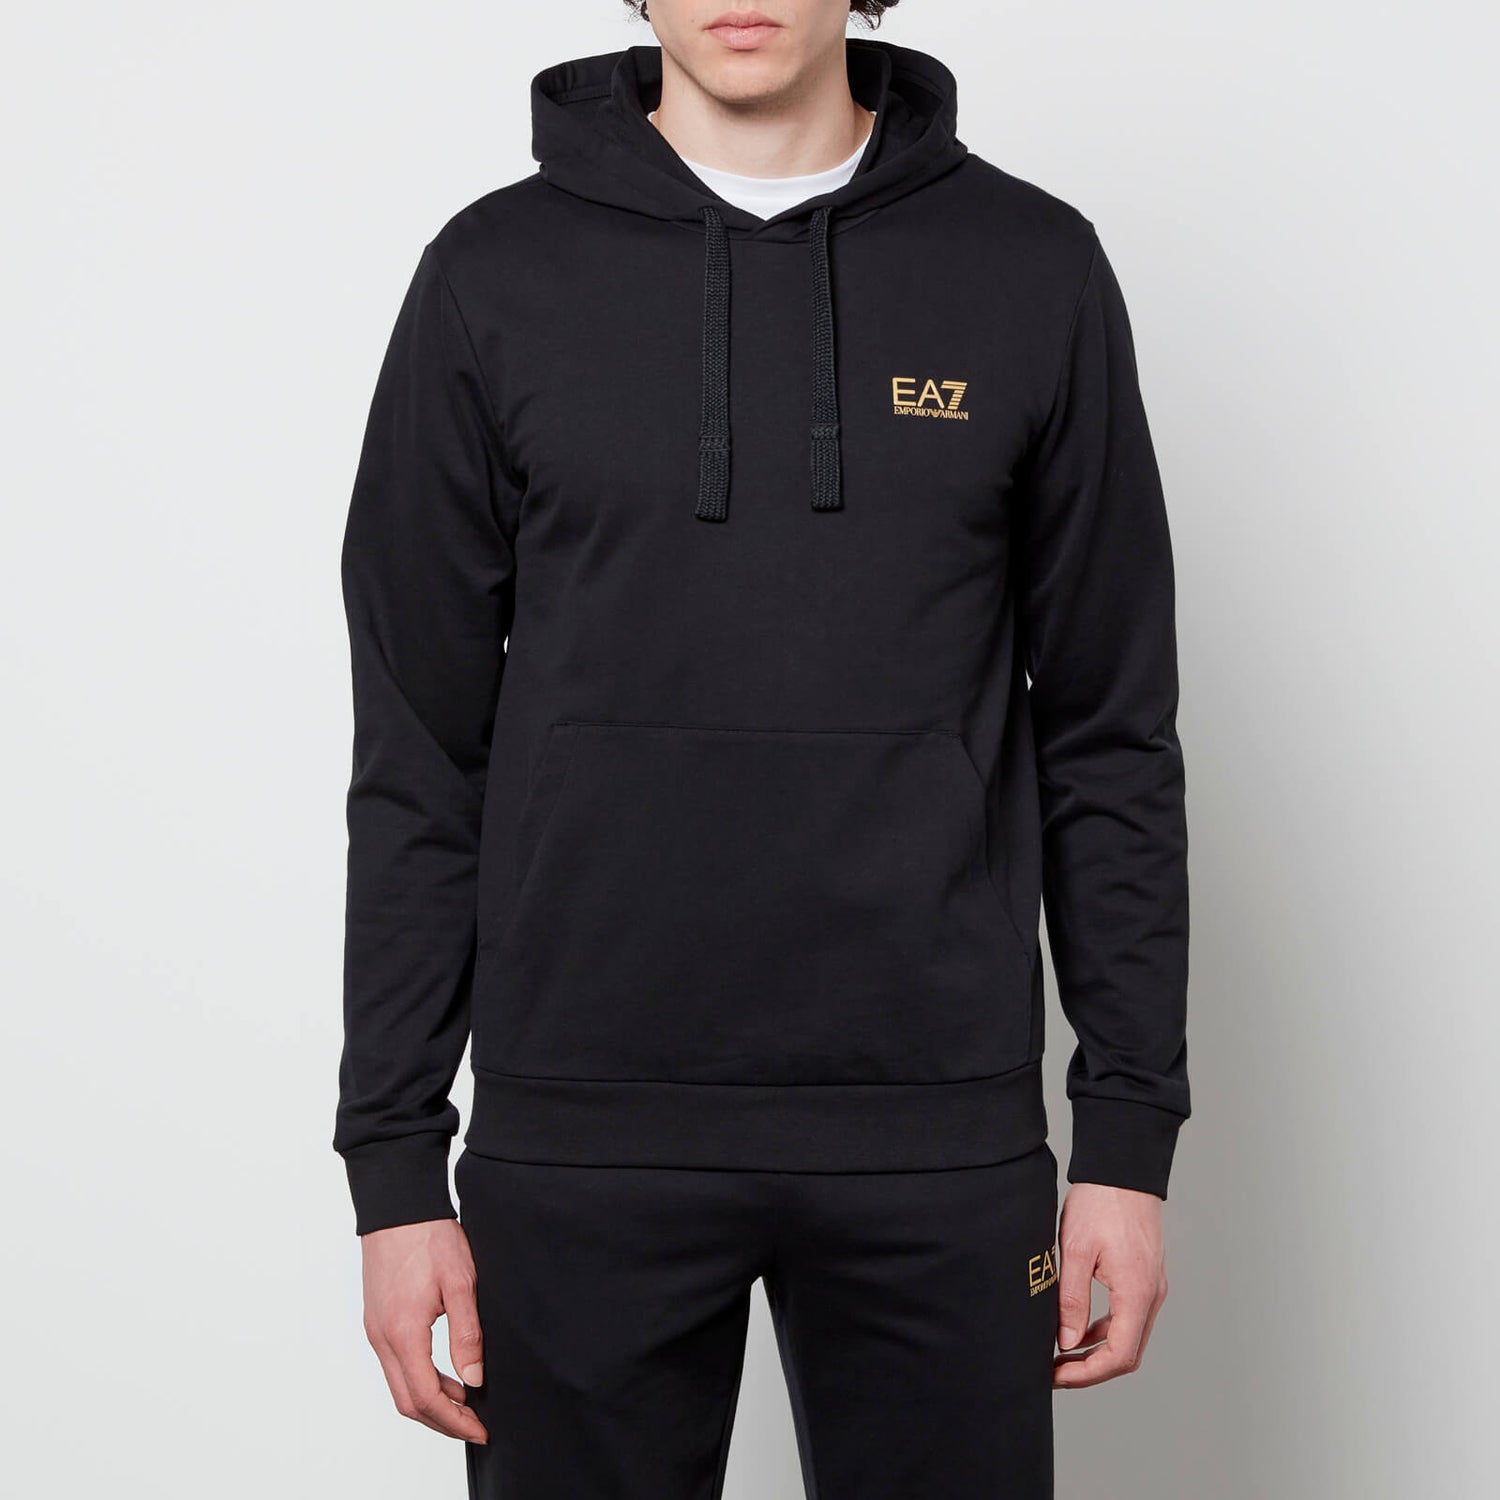 EA7 Men's Core Identity French Terry Hoodie - Black/Gold - S